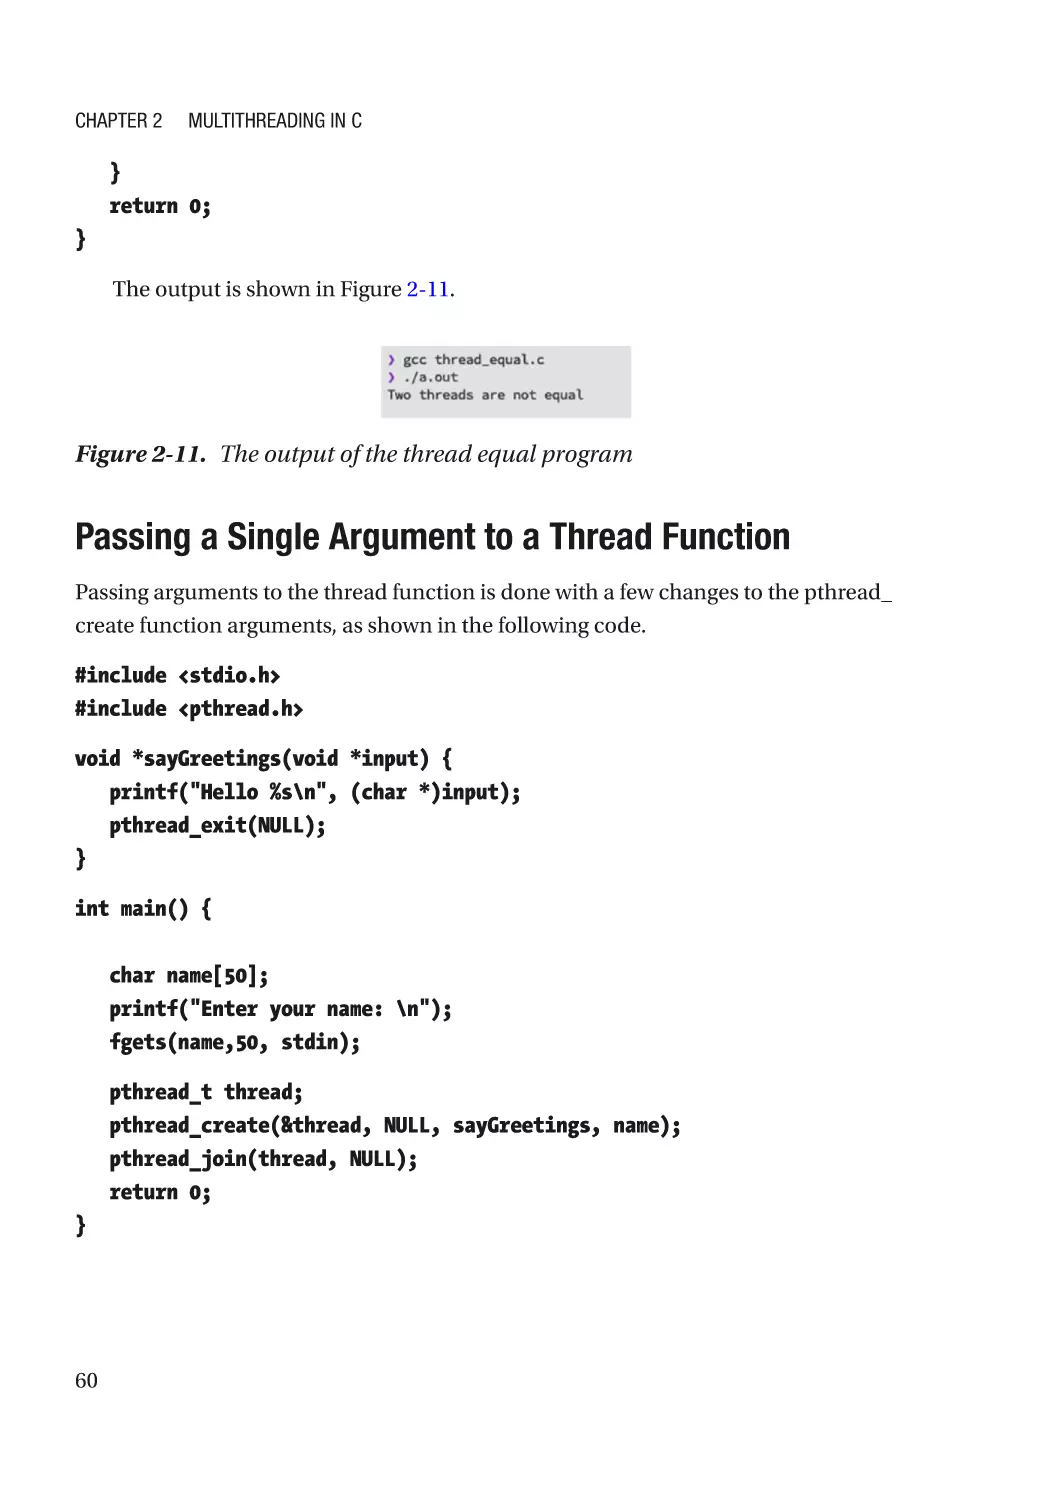 Passing a Single Argument to a Thread Function